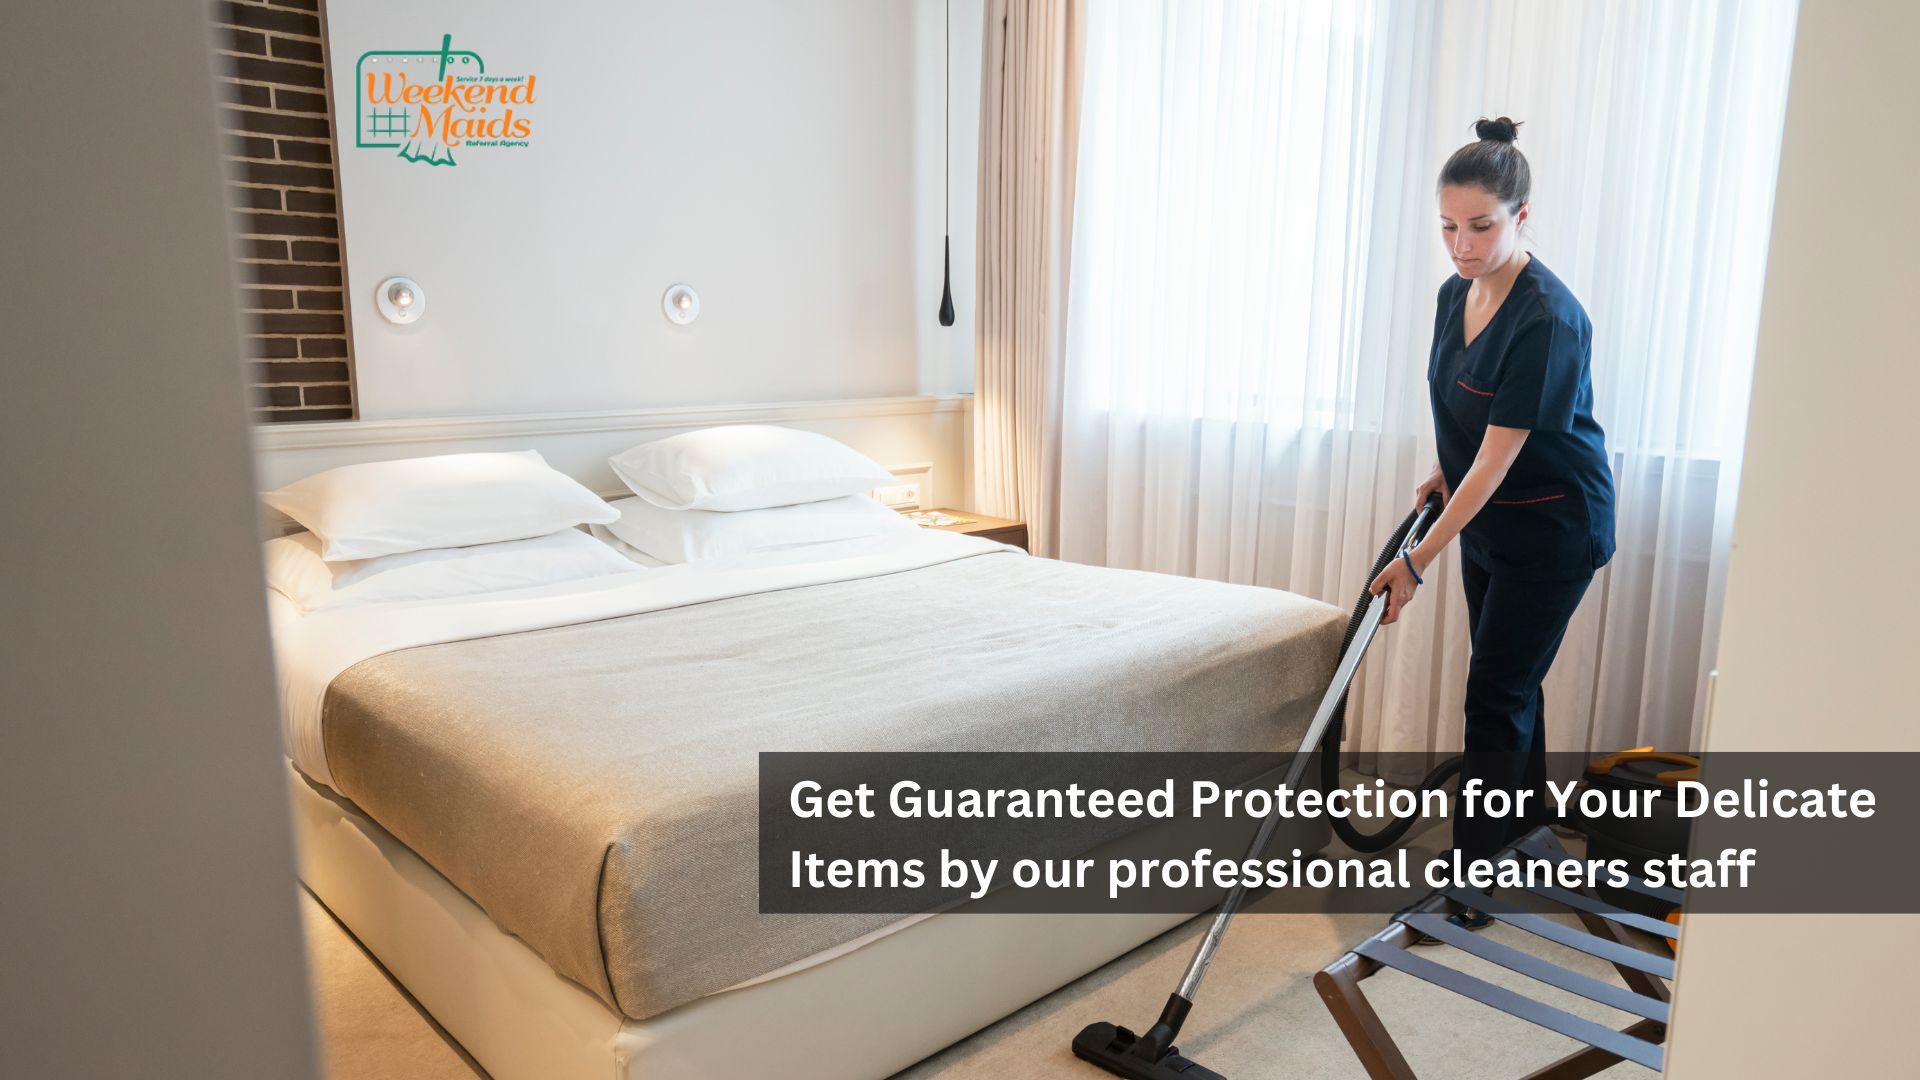 Get Guaranteed Protection for Your Delicate Items by our professional cleaners staff